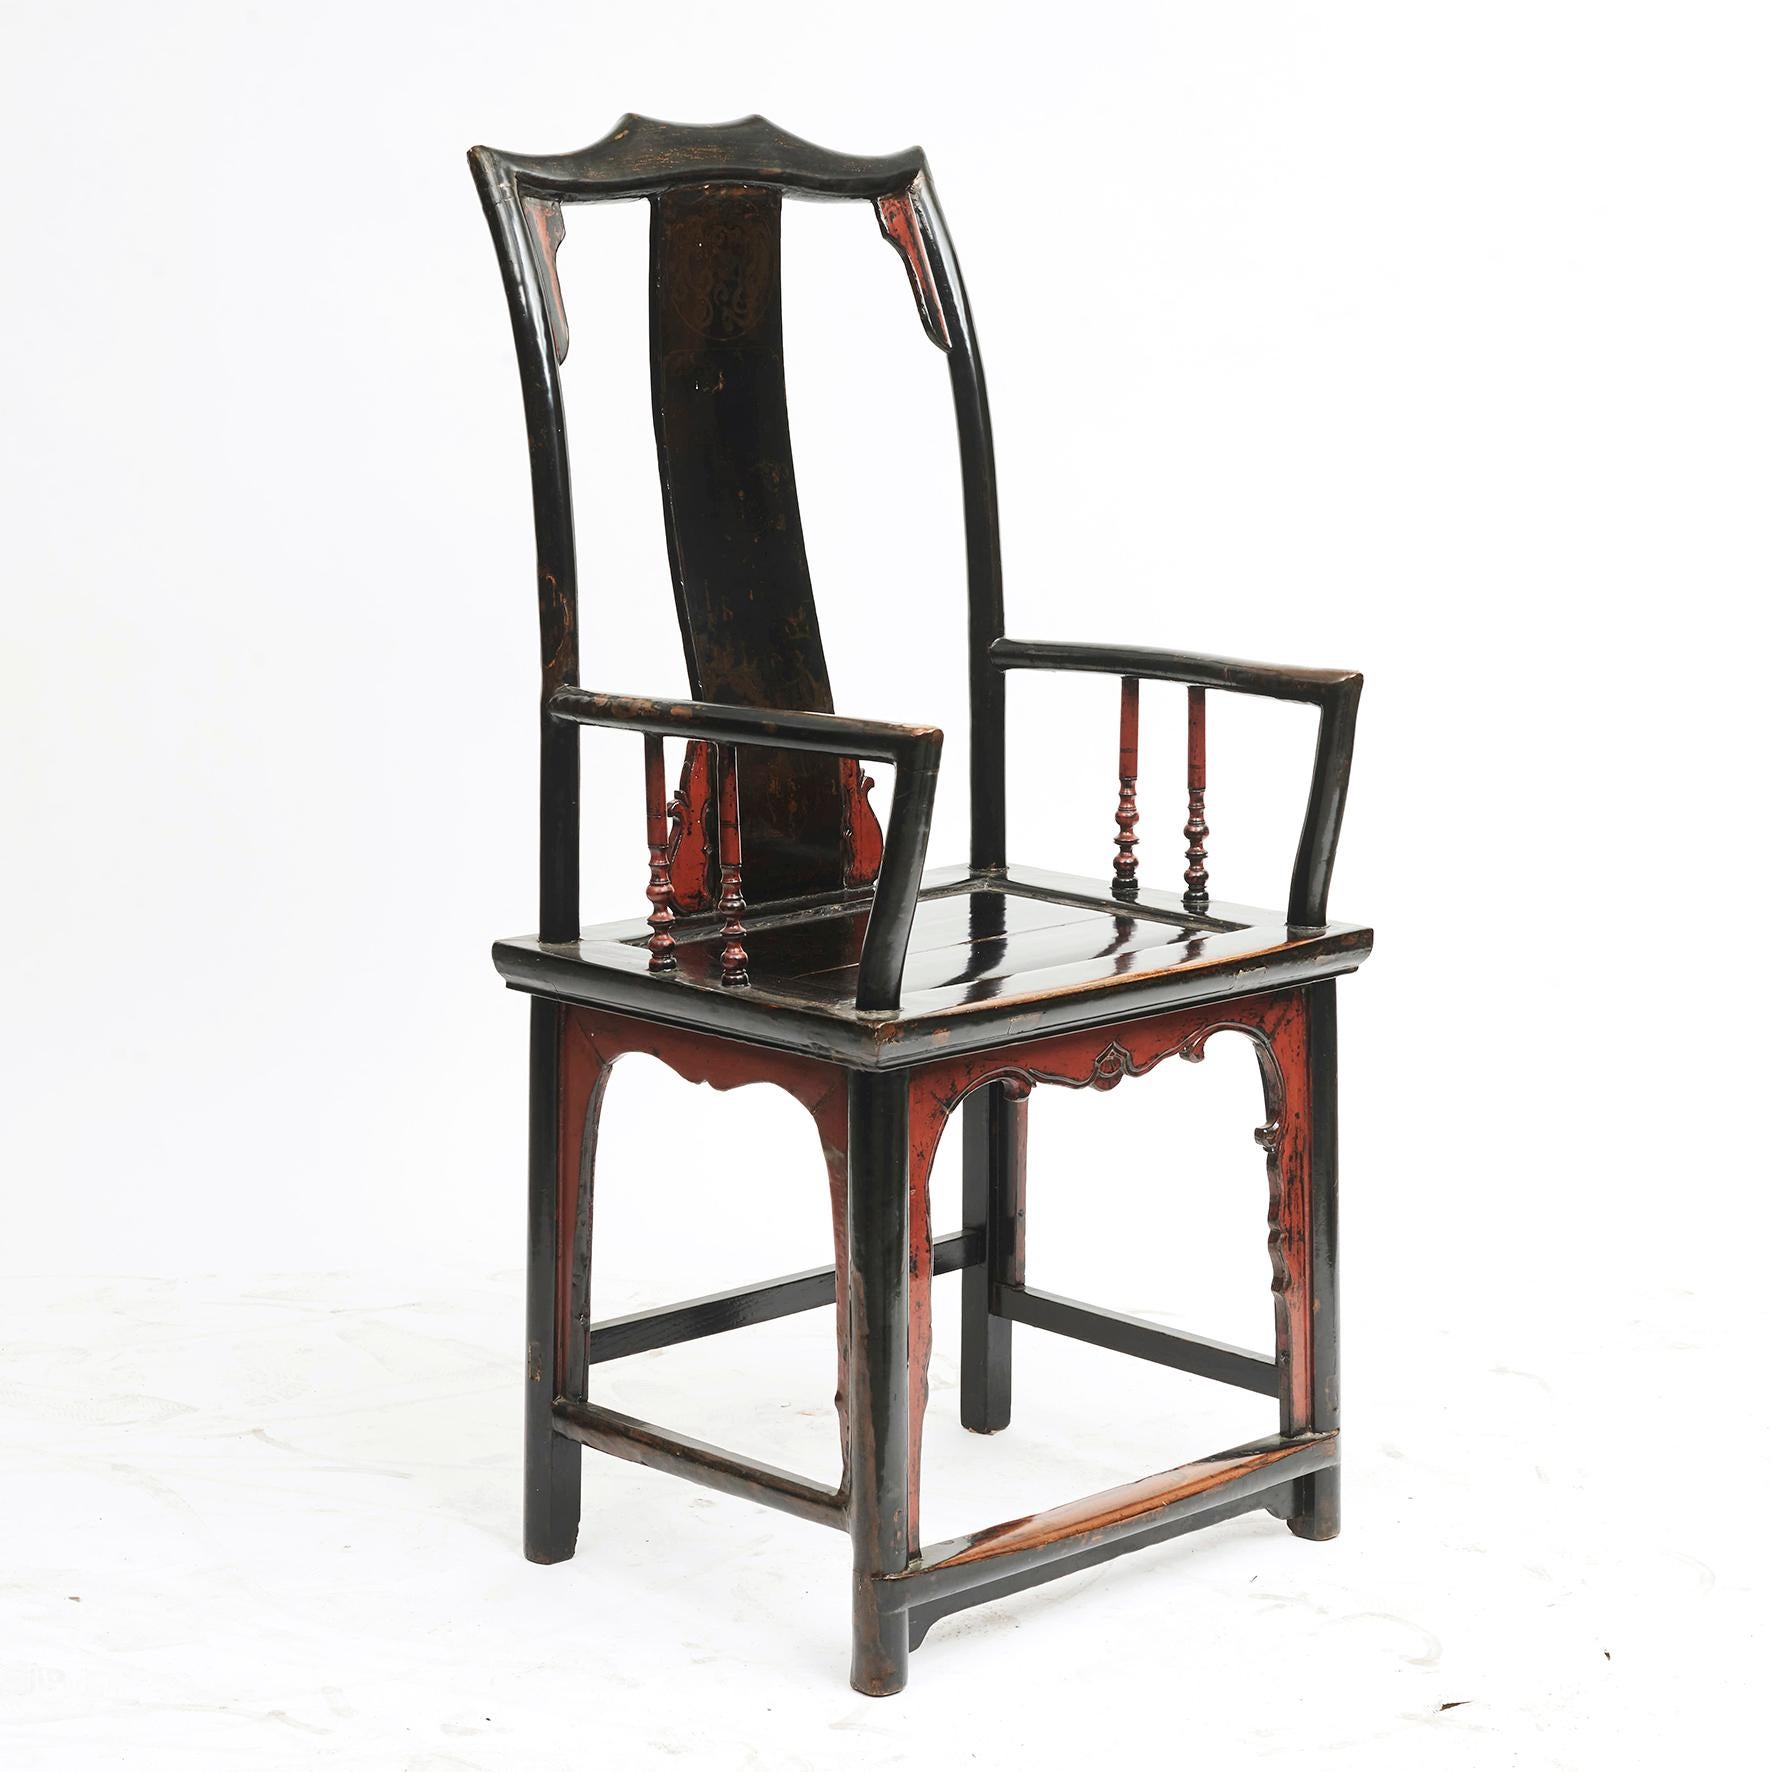 19th century Chinese Official chair.
Elmwood, original red and black lacquer.
Back splat with vague remains of decorations (natural wear and tear).
Carved scalloped aprons below the seat
Named 